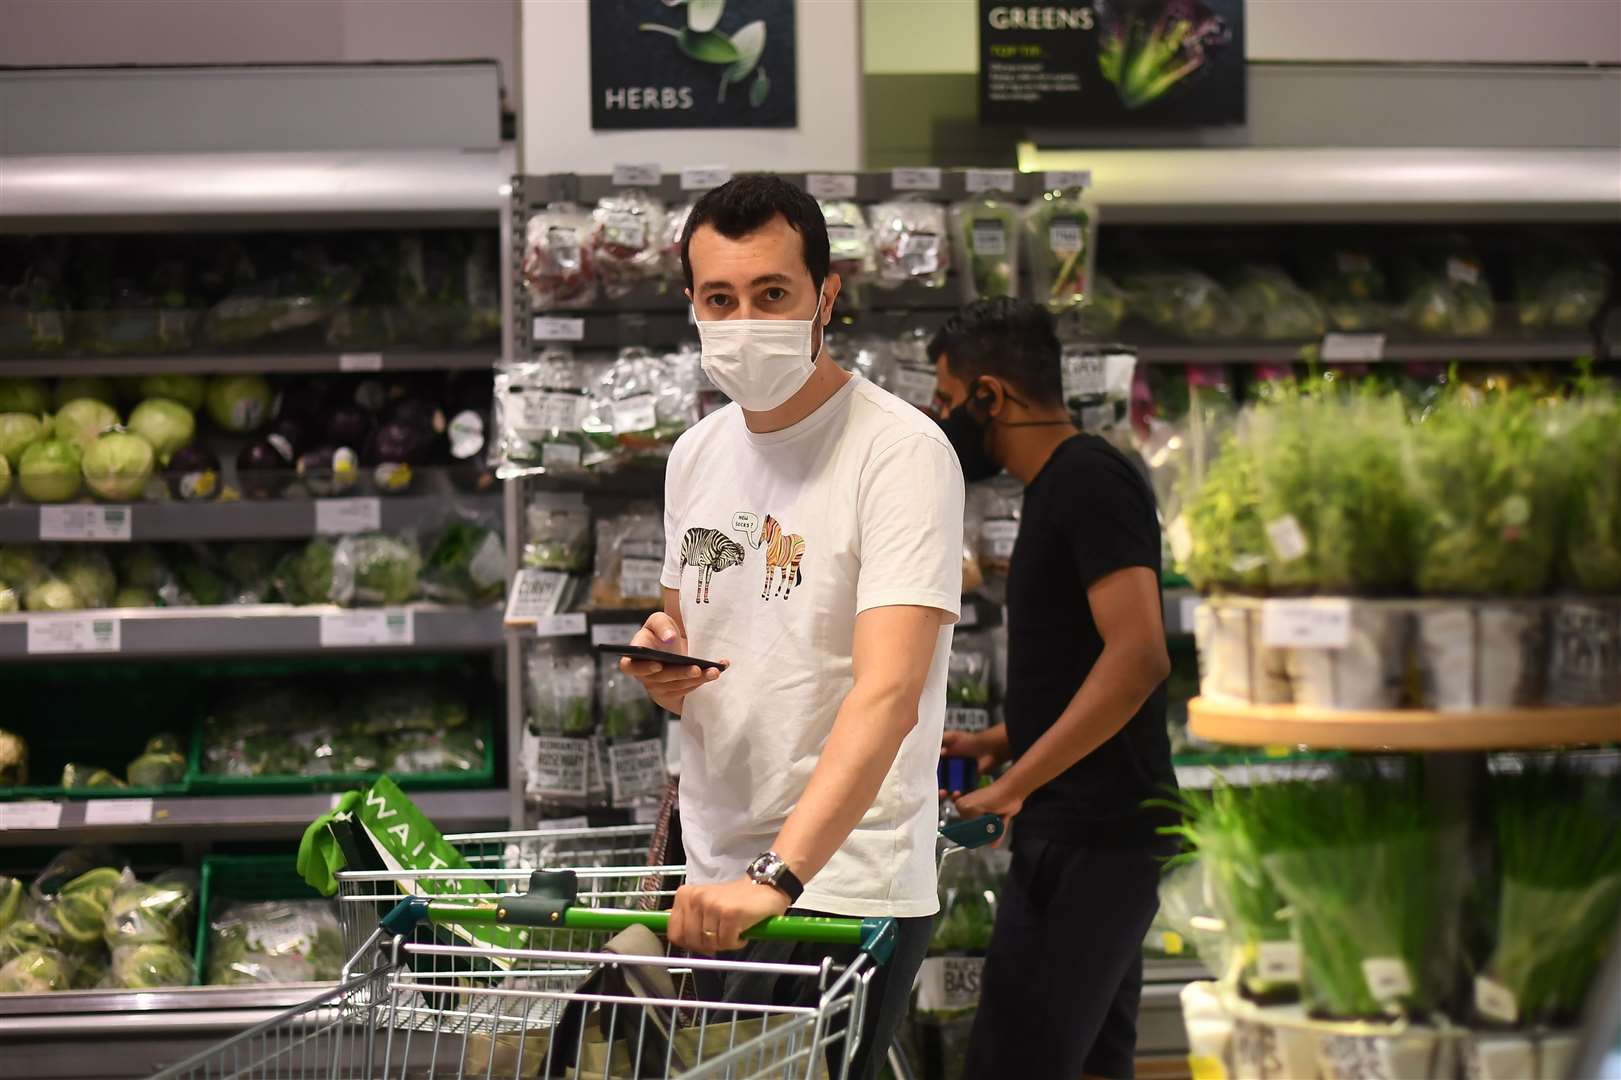 Face coverings are now mandatory, but it has not stopped shoppers flocking to stores in huge numbers (Victoria Jones/PA)